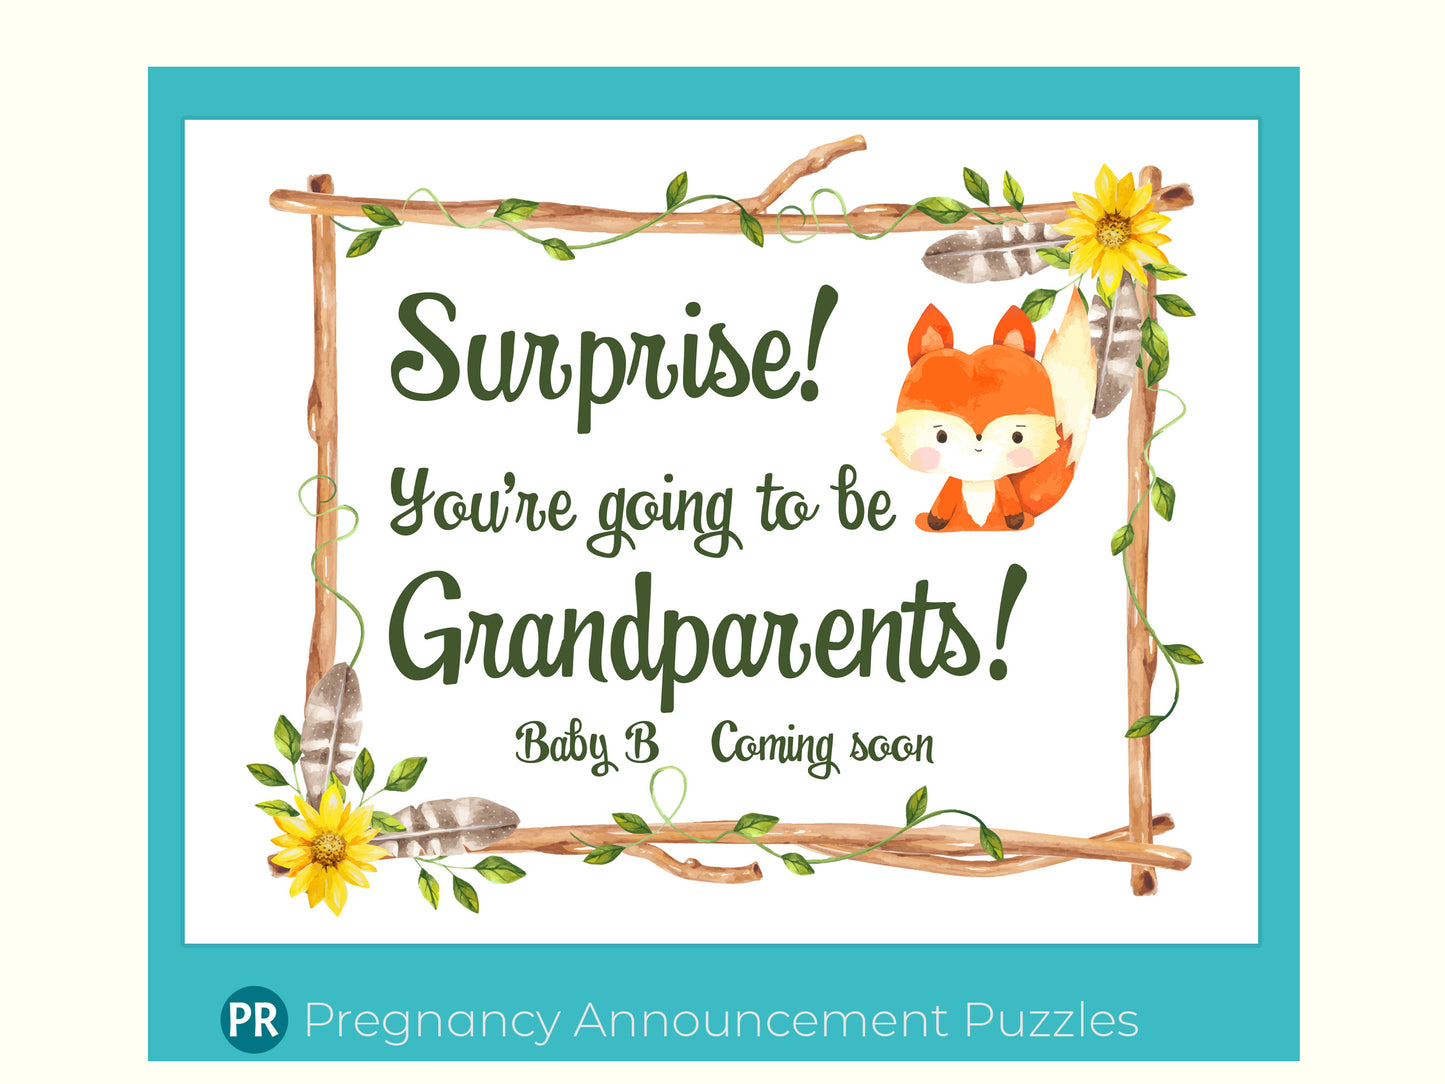 Baby is coming jigsaw puzzle announcement. Gift to give to grandparents or family members. Puzzle has a nature flower and leaves background with baby fox and a custom message about baby's name and when expected to arrive.